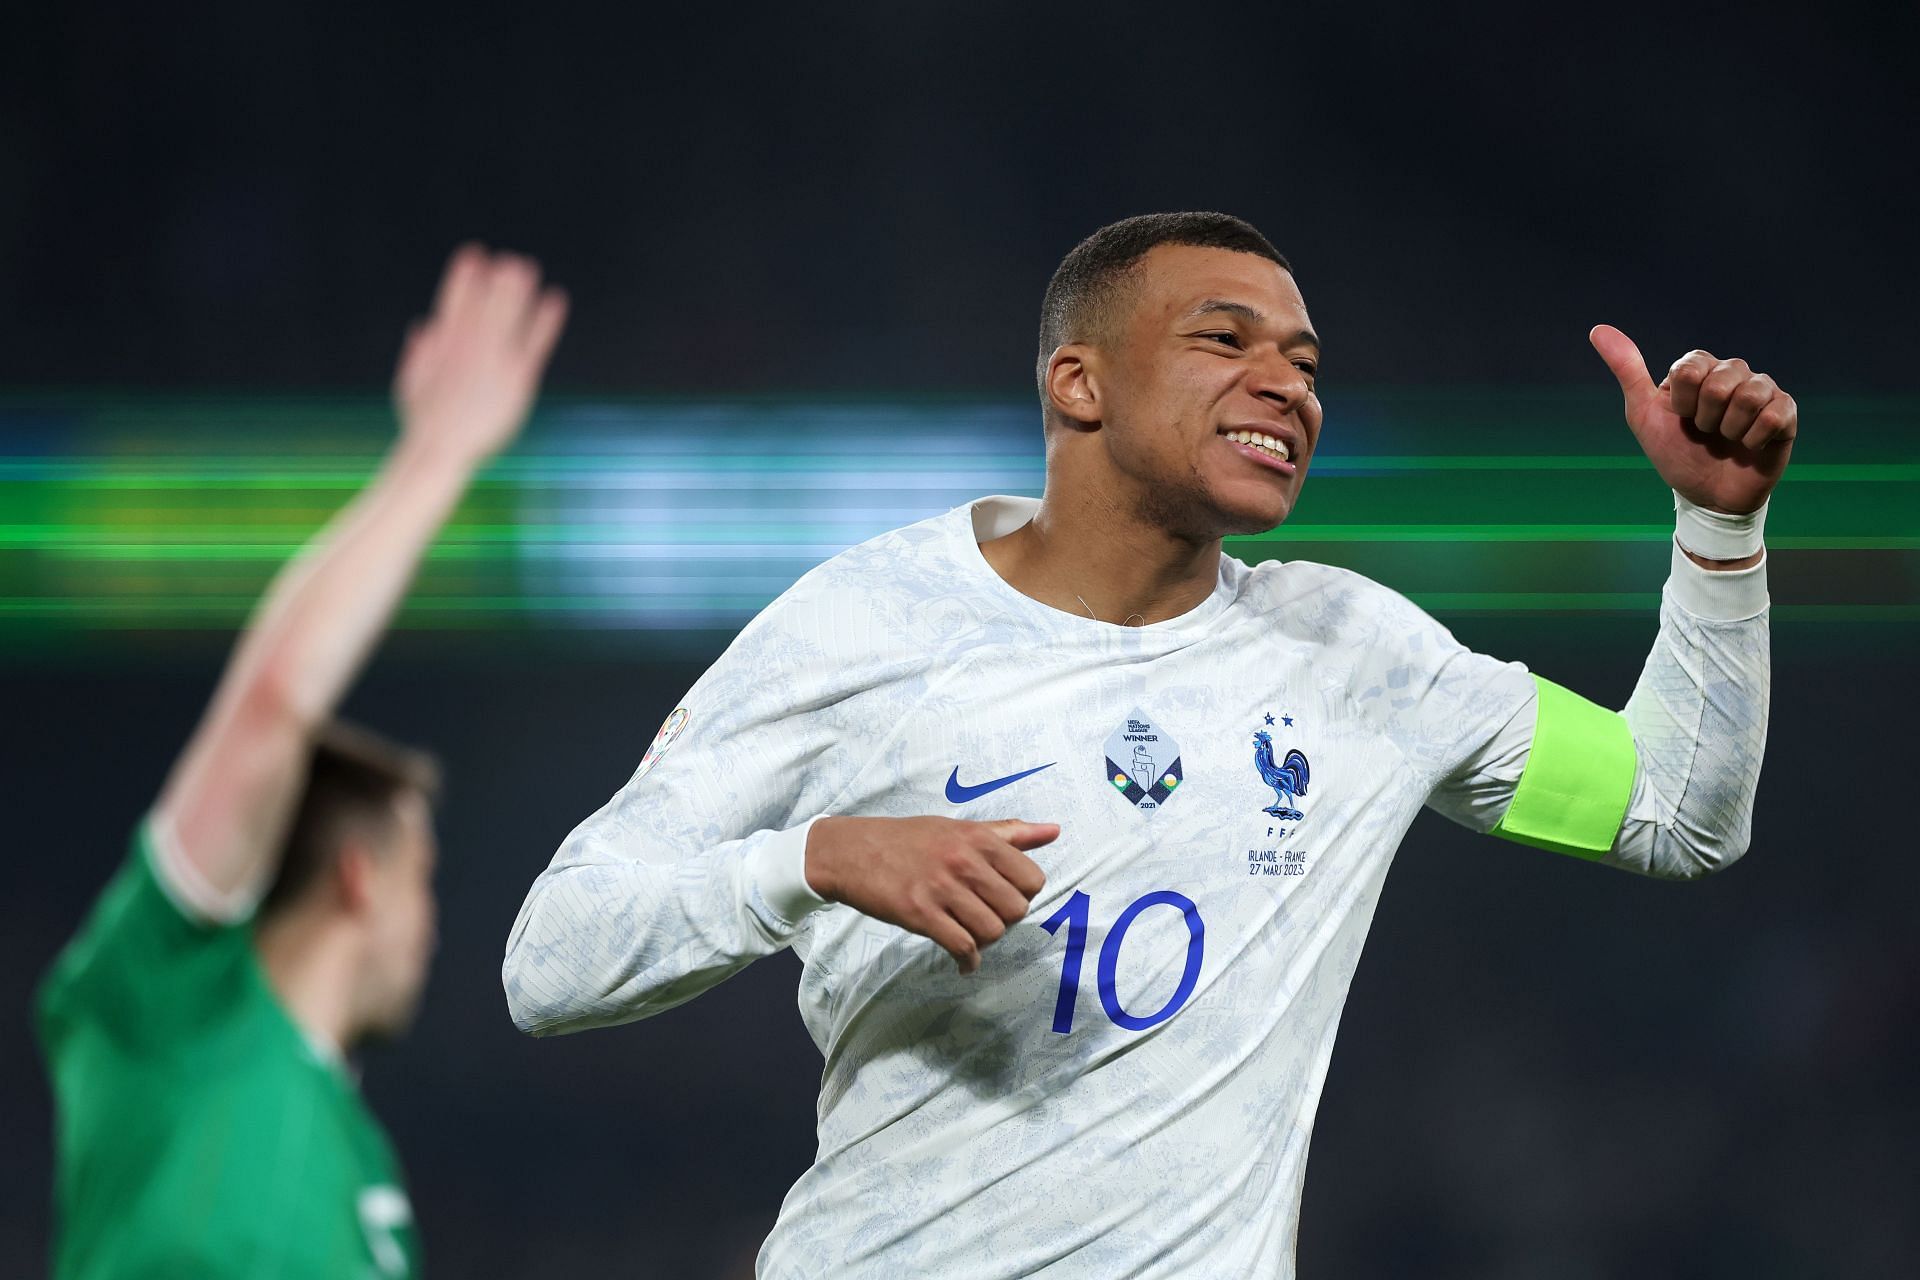 Mbappe (above) heaped praise on the Irish teenager.